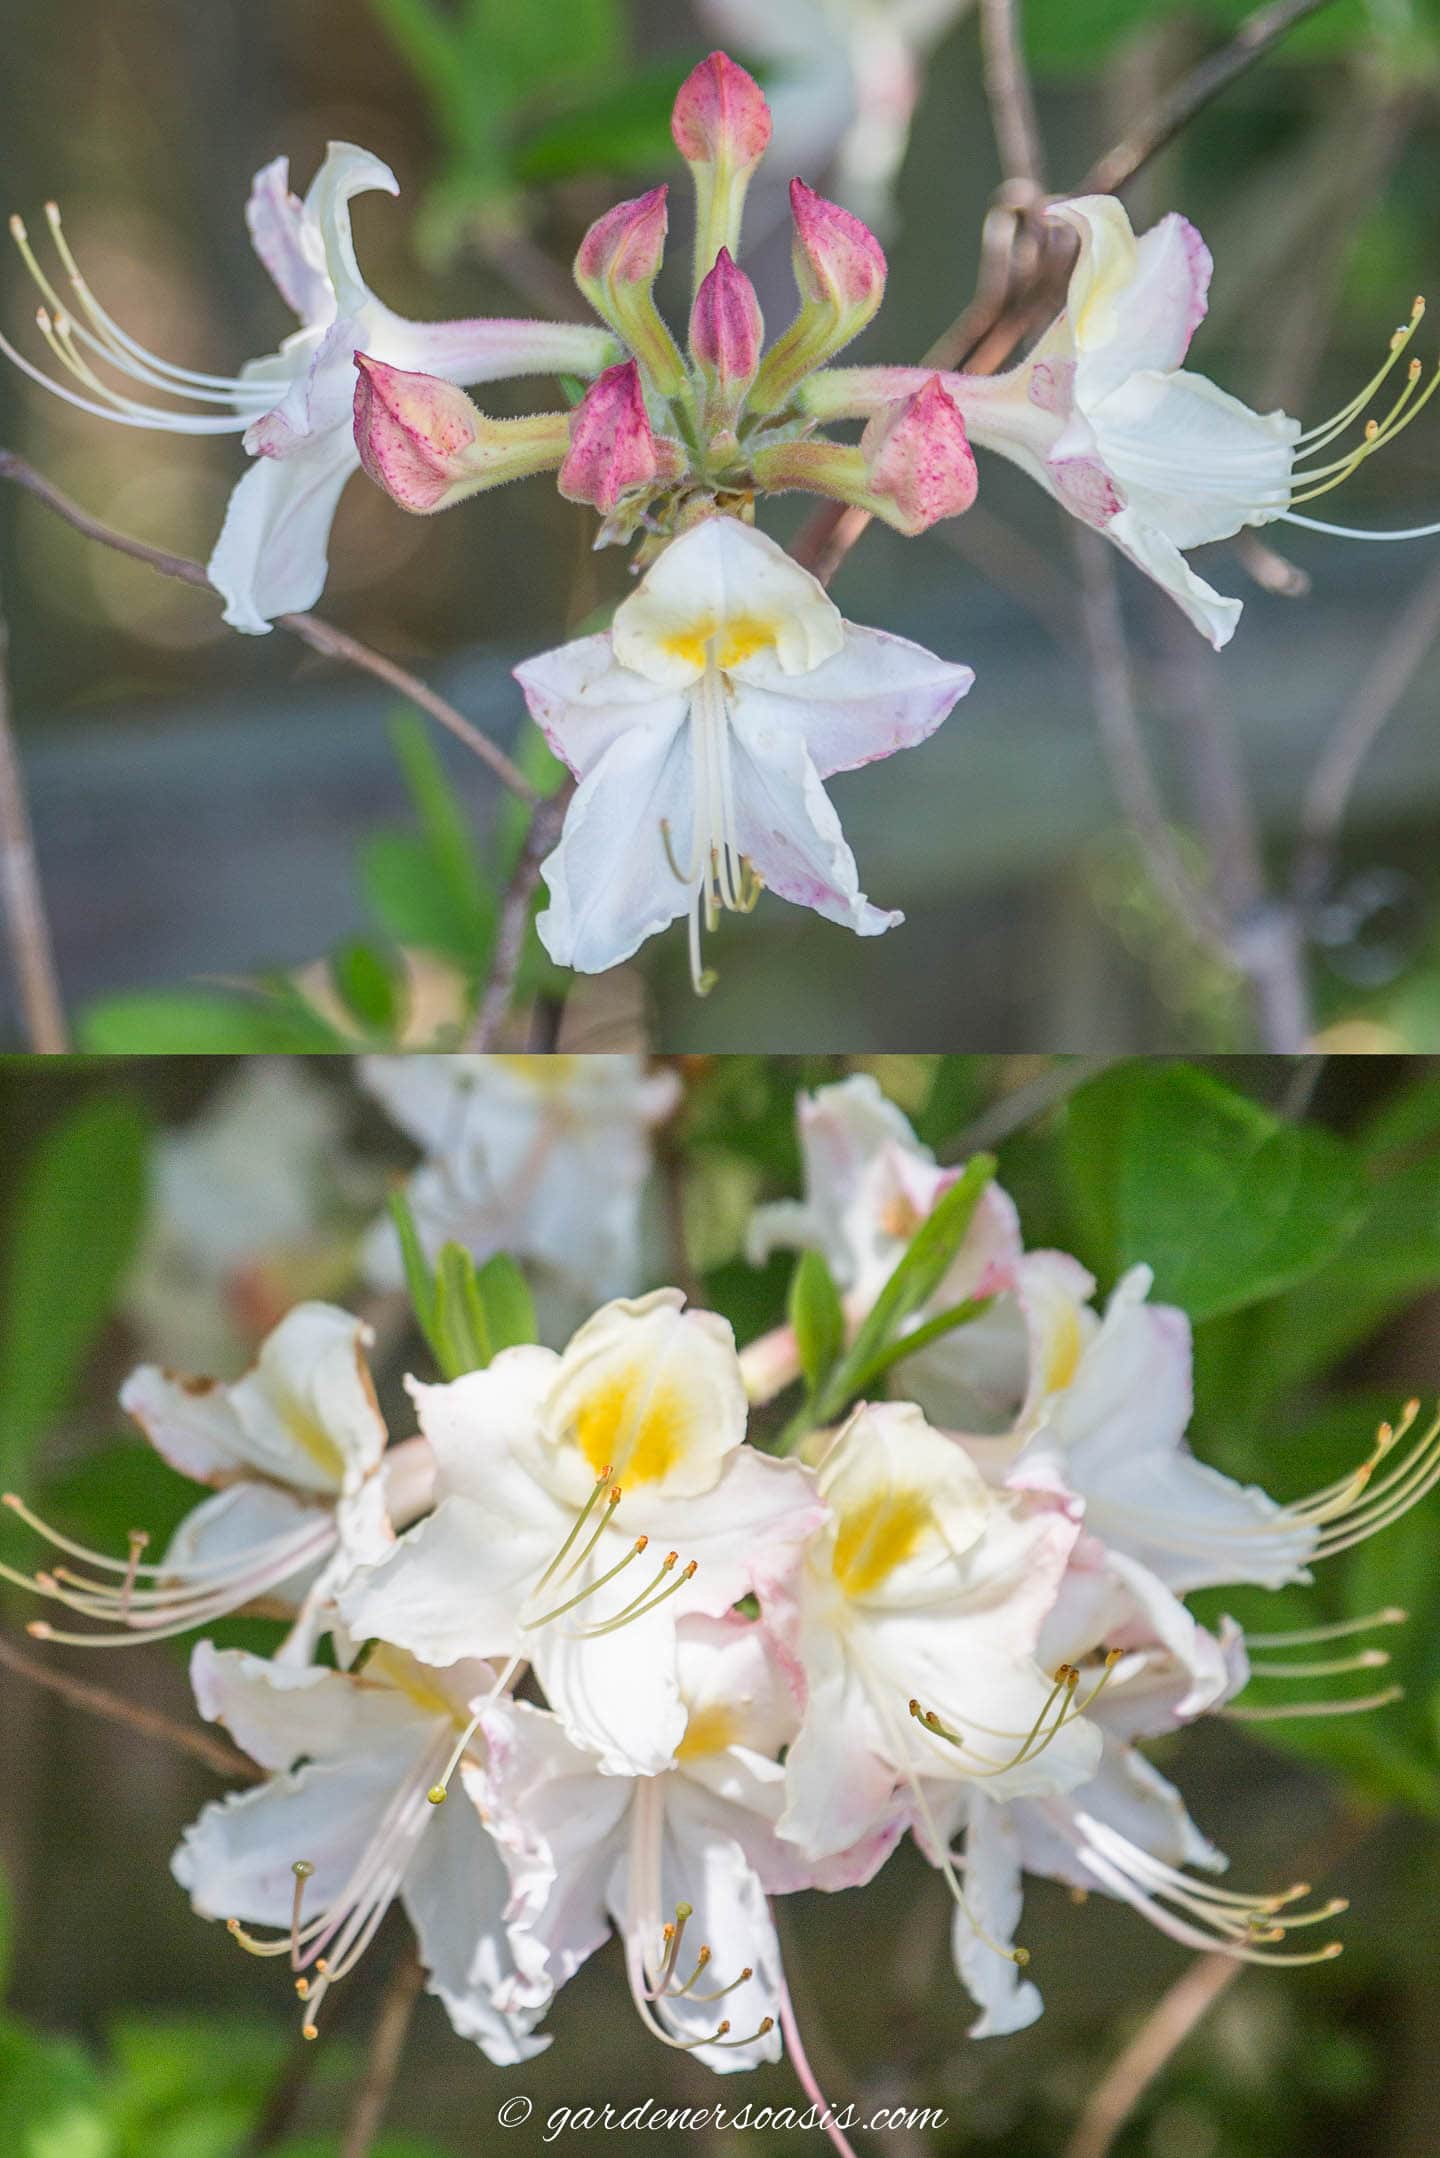 Rhododendron colemanii with pink buds and fully open white and yellow flowers